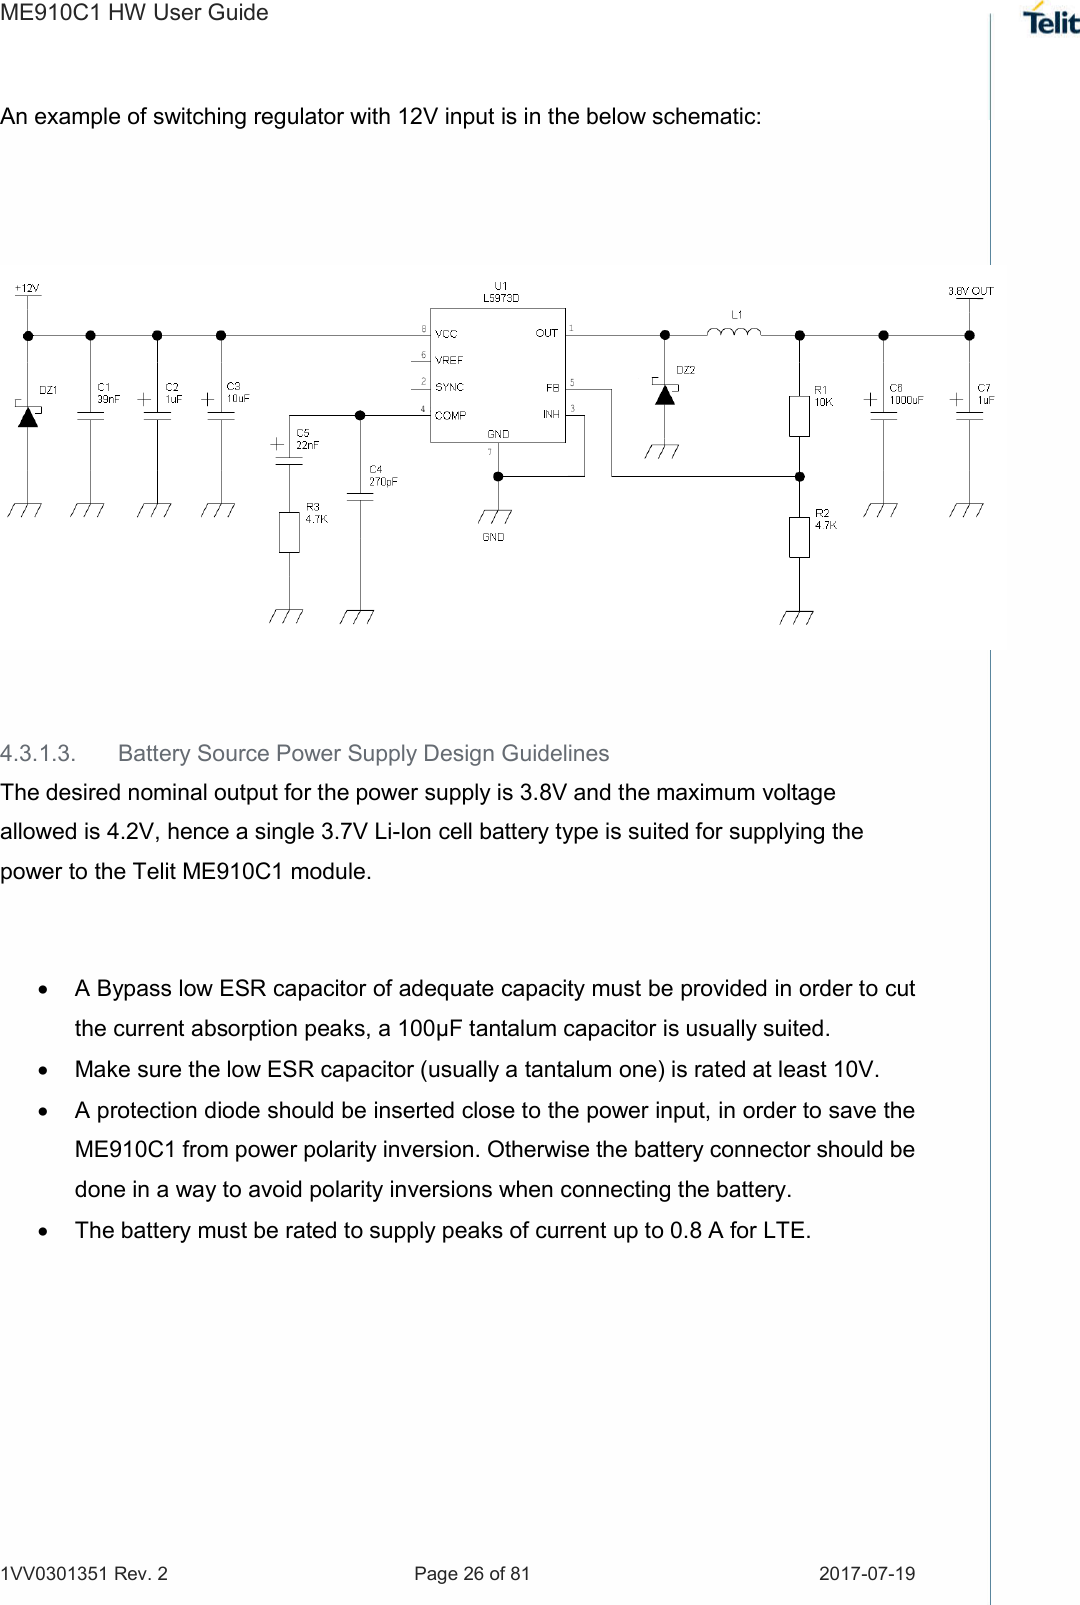 ME910C1 HW User Guide 1VV0301351 Rev. 2  Page 26 of 81  2017-07-19  An example of switching regulator with 12V input is in the below schematic:      4.3.1.3.  Battery Source Power Supply Design Guidelines The desired nominal output for the power supply is 3.8V and the maximum voltage allowed is 4.2V, hence a single 3.7V Li-Ion cell battery type is suited for supplying the power to the Telit ME910C1 module.    A Bypass low ESR capacitor of adequate capacity must be provided in order to cut the current absorption peaks, a 100μF tantalum capacitor is usually suited.   Make sure the low ESR capacitor (usually a tantalum one) is rated at least 10V.   A protection diode should be inserted close to the power input, in order to save the ME910C1 from power polarity inversion. Otherwise the battery connector should be done in a way to avoid polarity inversions when connecting the battery.   The battery must be rated to supply peaks of current up to 0.8 A for LTE.      